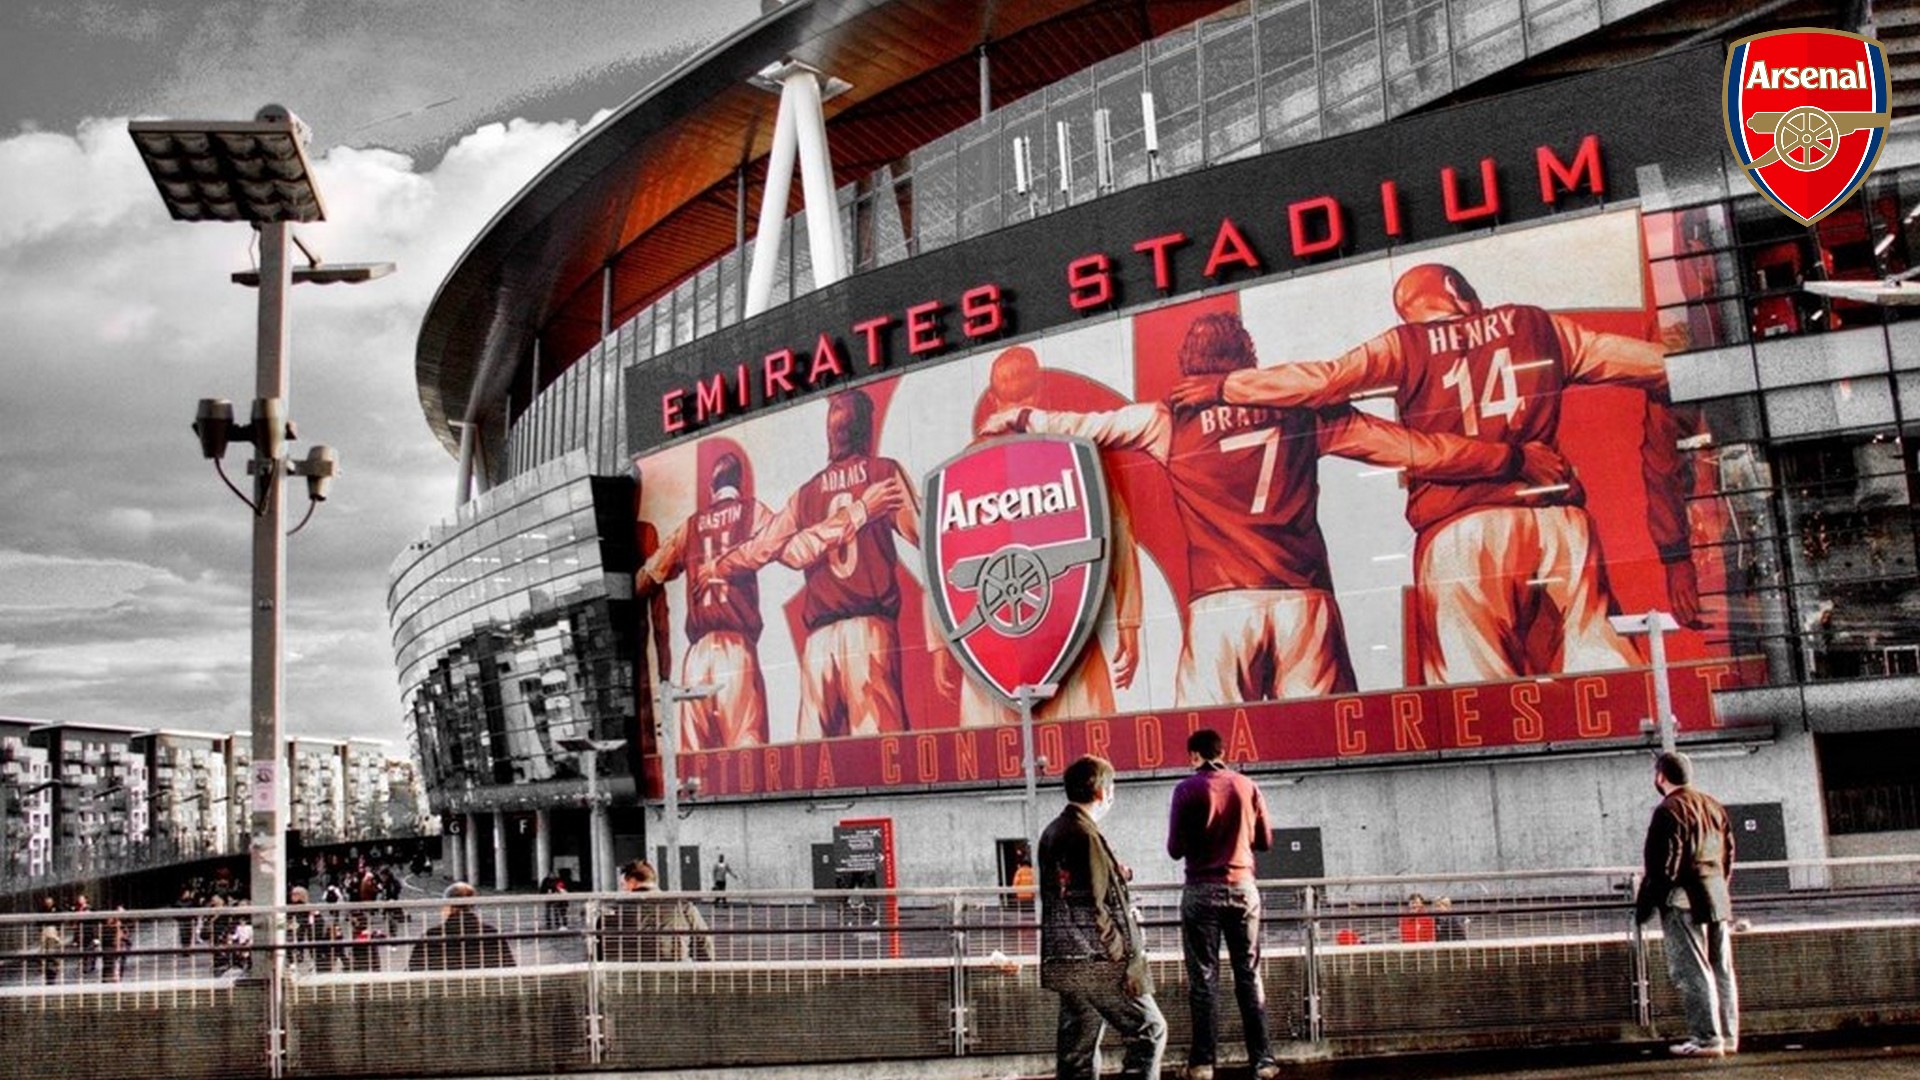 Arsenal Stadium HD Wallpapers With Resolution 1920X1080 pixel. You can make this wallpaper for your Mac or Windows Desktop Background, iPhone, Android or Tablet and another Smartphone device for free